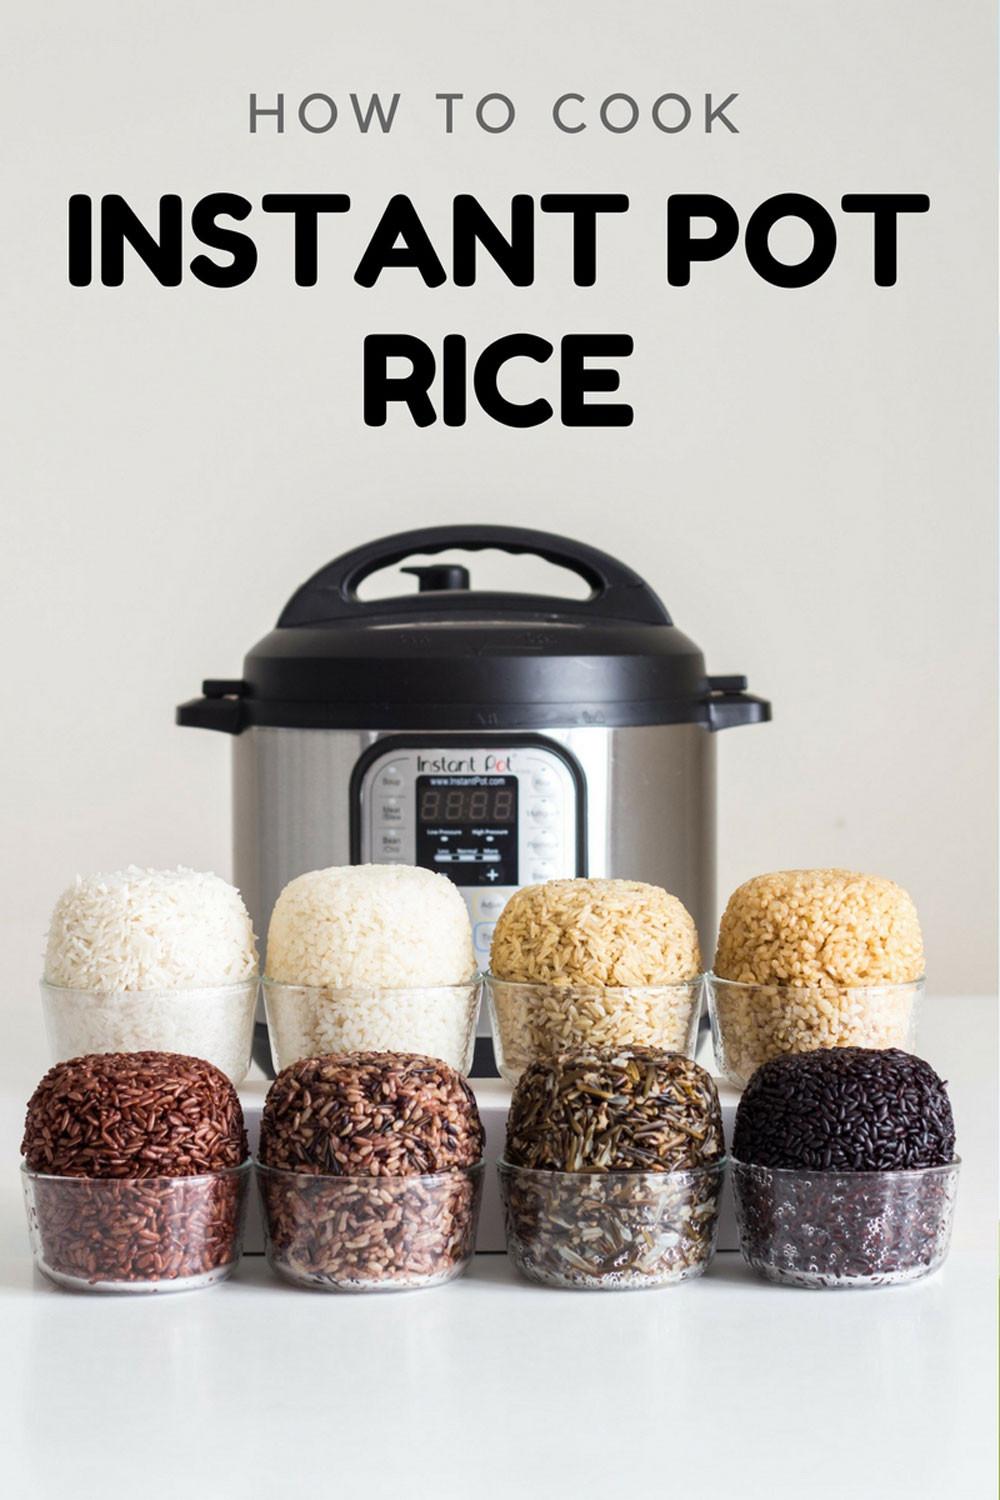 Cooking Brown Rice In Instant Pot
 Failproof Instant Pot Rice Green Healthy Cooking